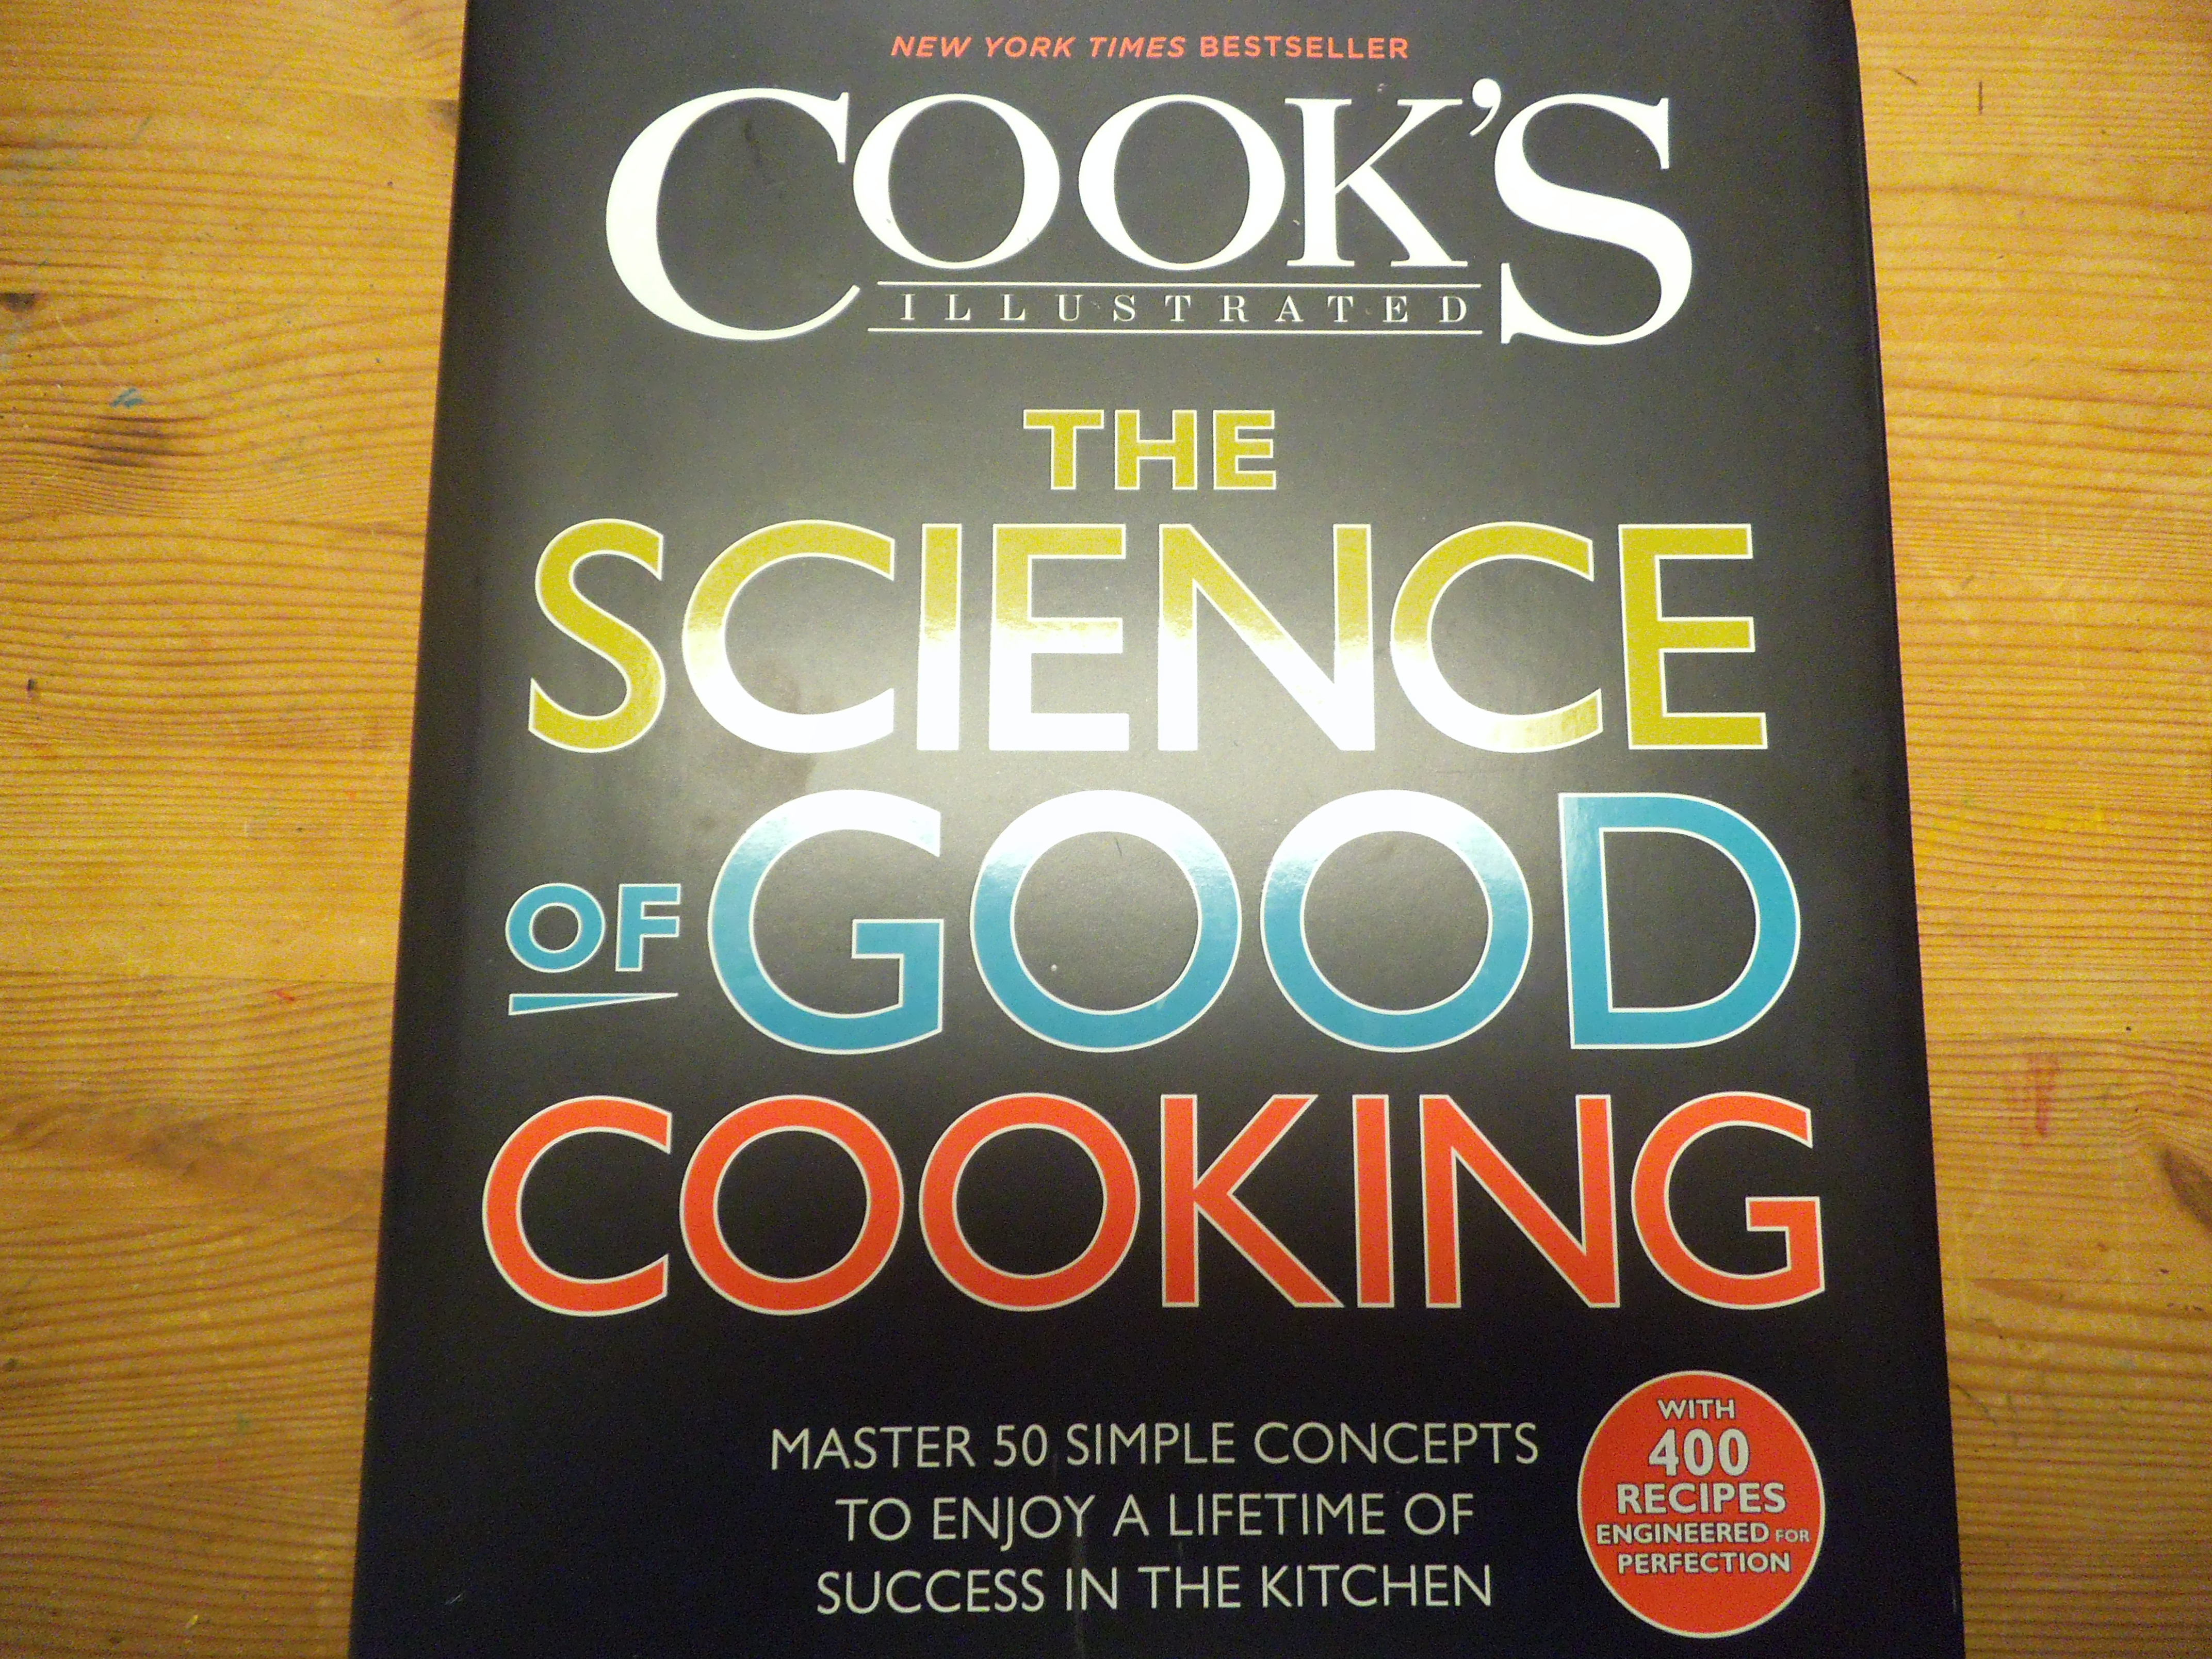 The Science of Good Cooking: Master 50 Simple Concepts to Enjoy a Lifetime  of Success in the Kitchen by Cook's Illustrated